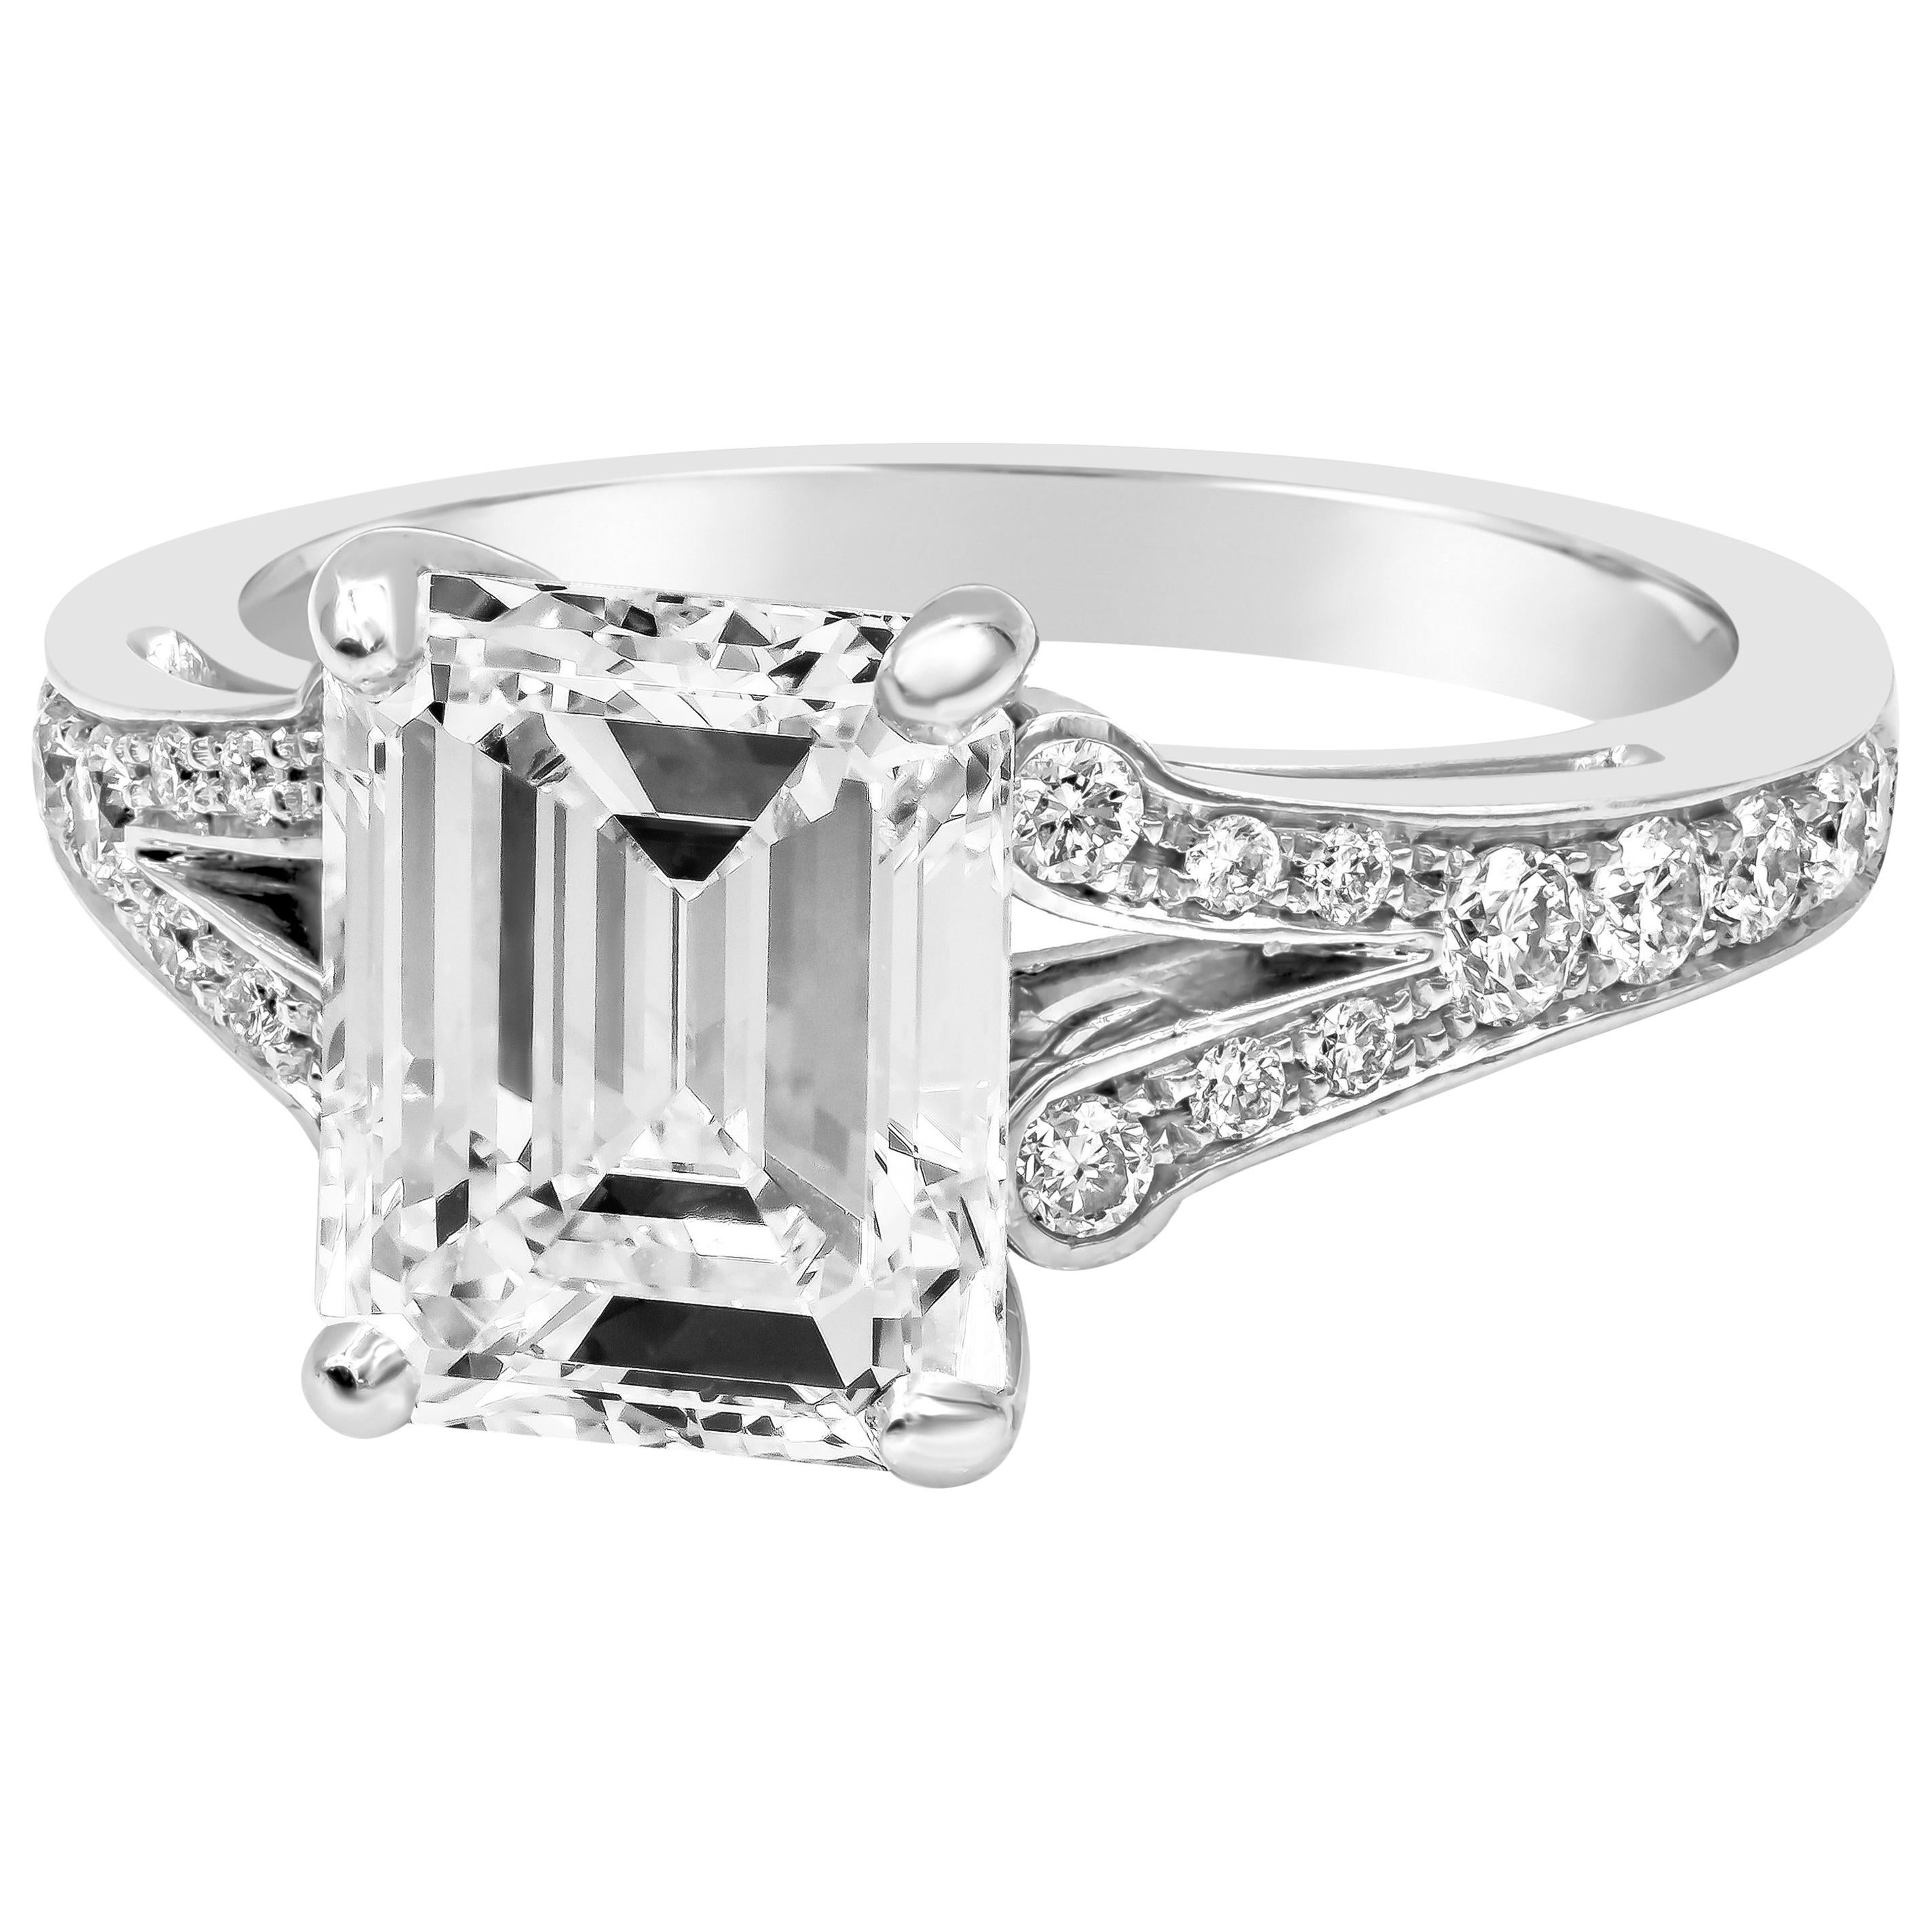 Showcases a 3.01 carats emerald cut diamond that GIA certified as E color and VS2 in clarity, set in a split-shank platinum setting accented with round brilliant diamonds on each side. Accent diamonds weigh 0.46 carats total. Made with platinum.